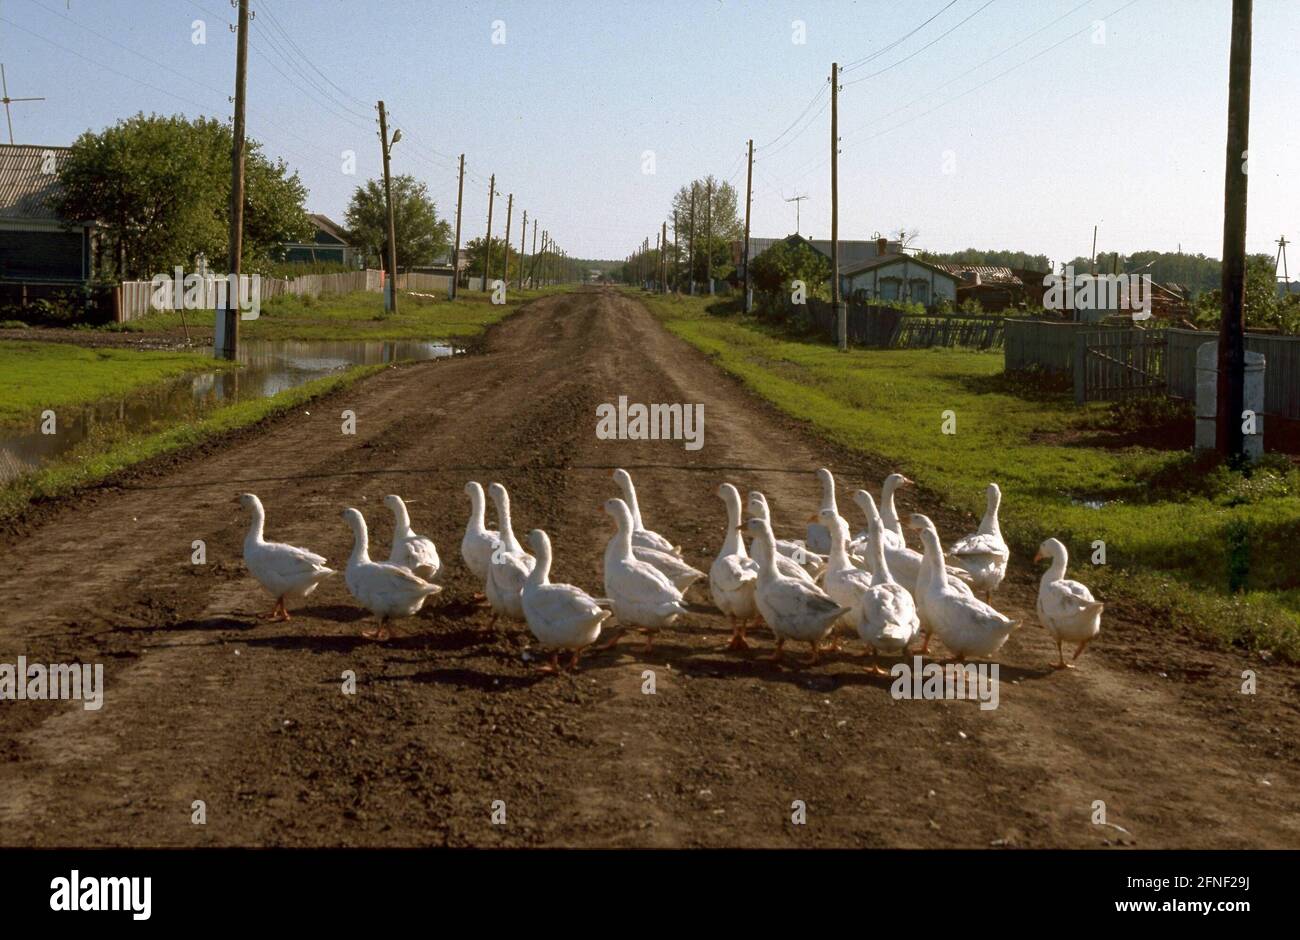 Geese on a village street in the German rayon Asowo near the West Siberian Omsk. In Siberia, settlements of Russian Germans (Sibiri Germans) began to appear in 1881. [automated translation] Stock Photo